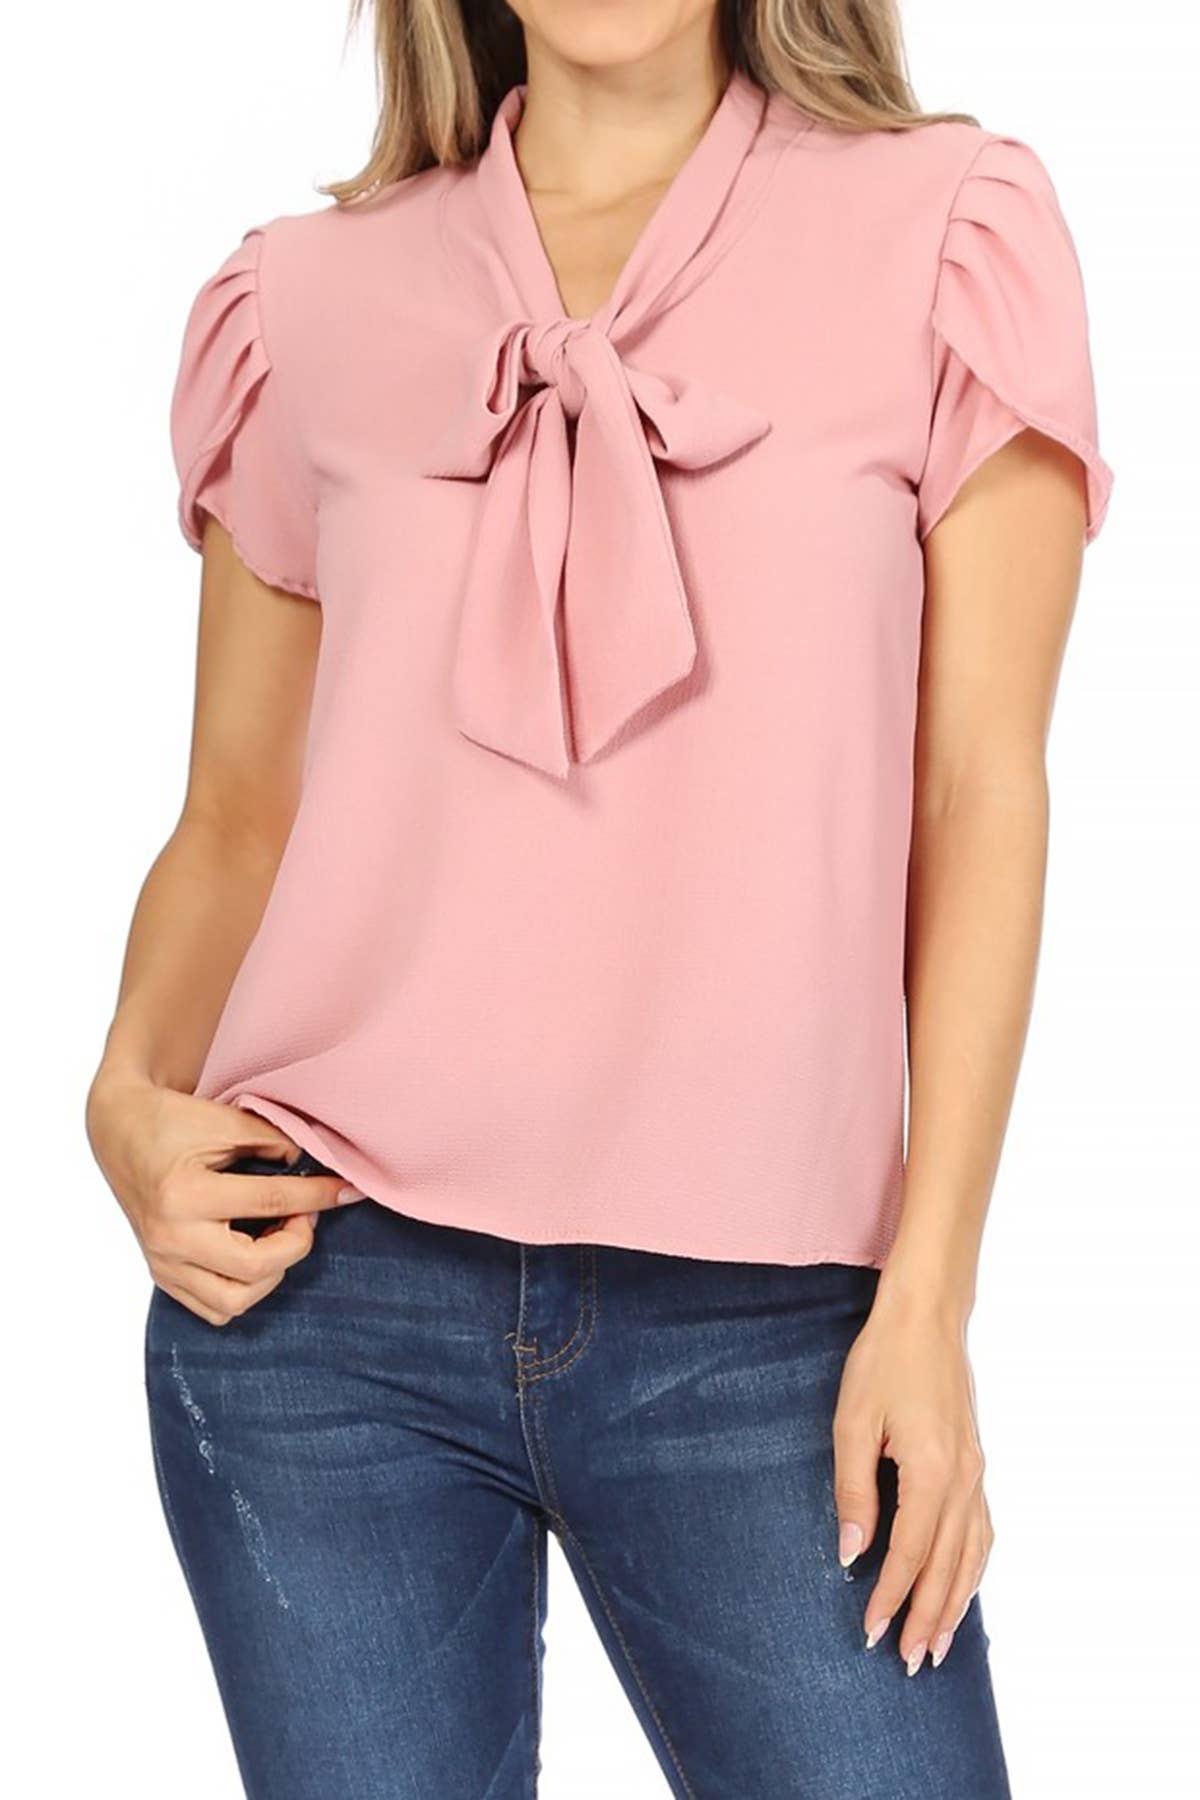 dusty pink  or beige chiffon blouse with collar bow tie and cap sleeves